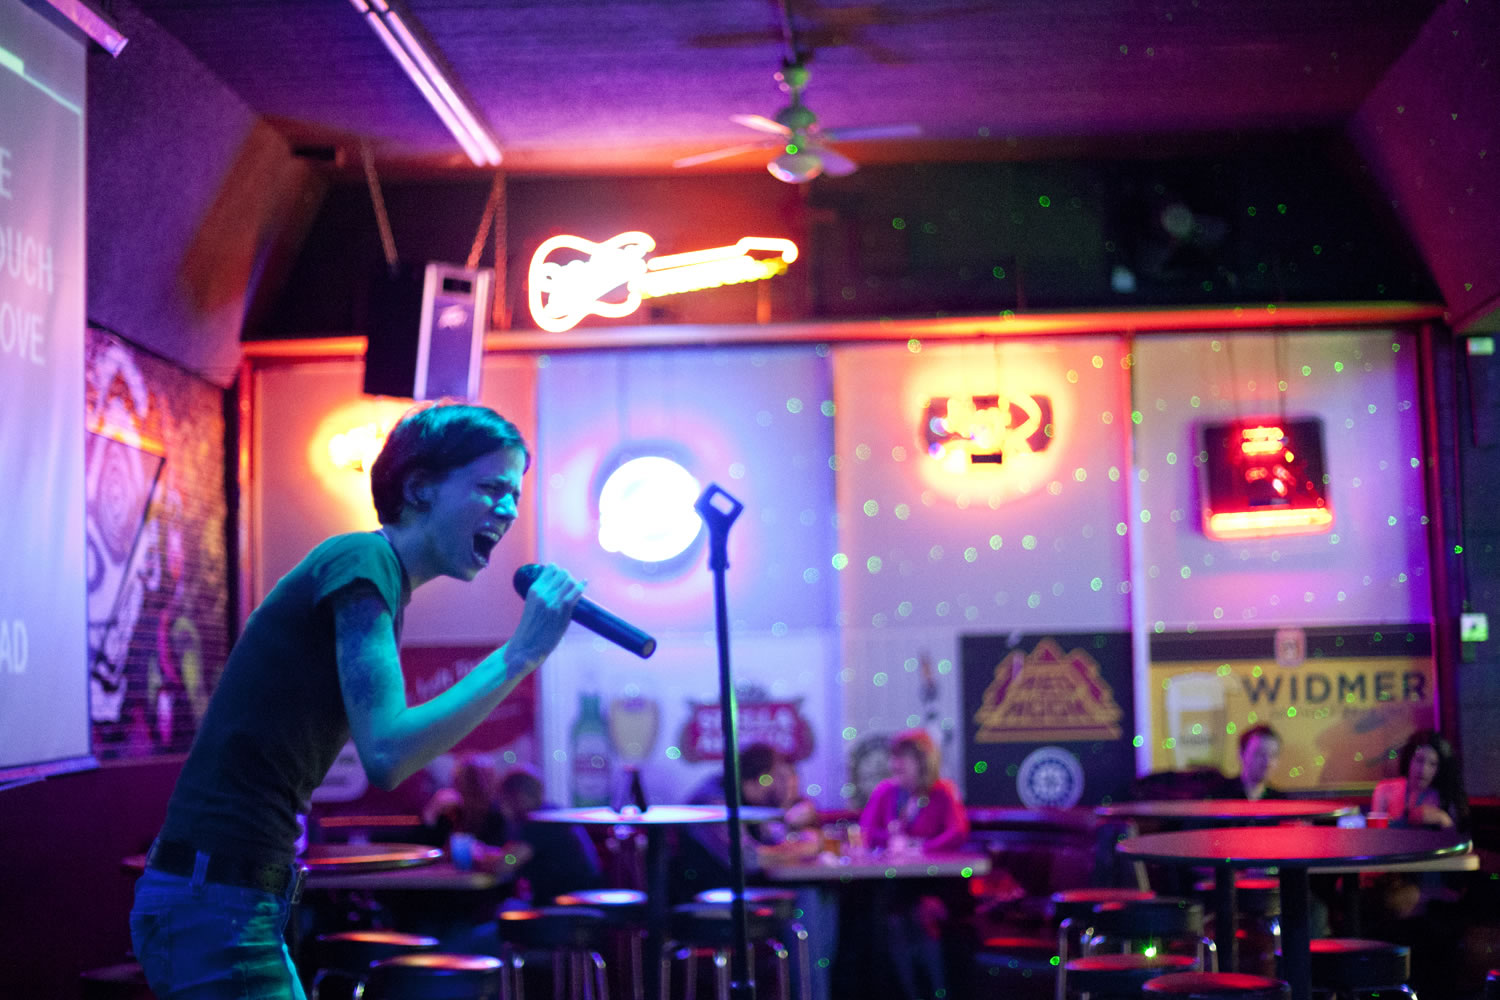 Gayle Tucker, 26, of Washougal belts out an Evanescence song and other heavy metal songs at BackAlley's Metal Monday karaoke night.